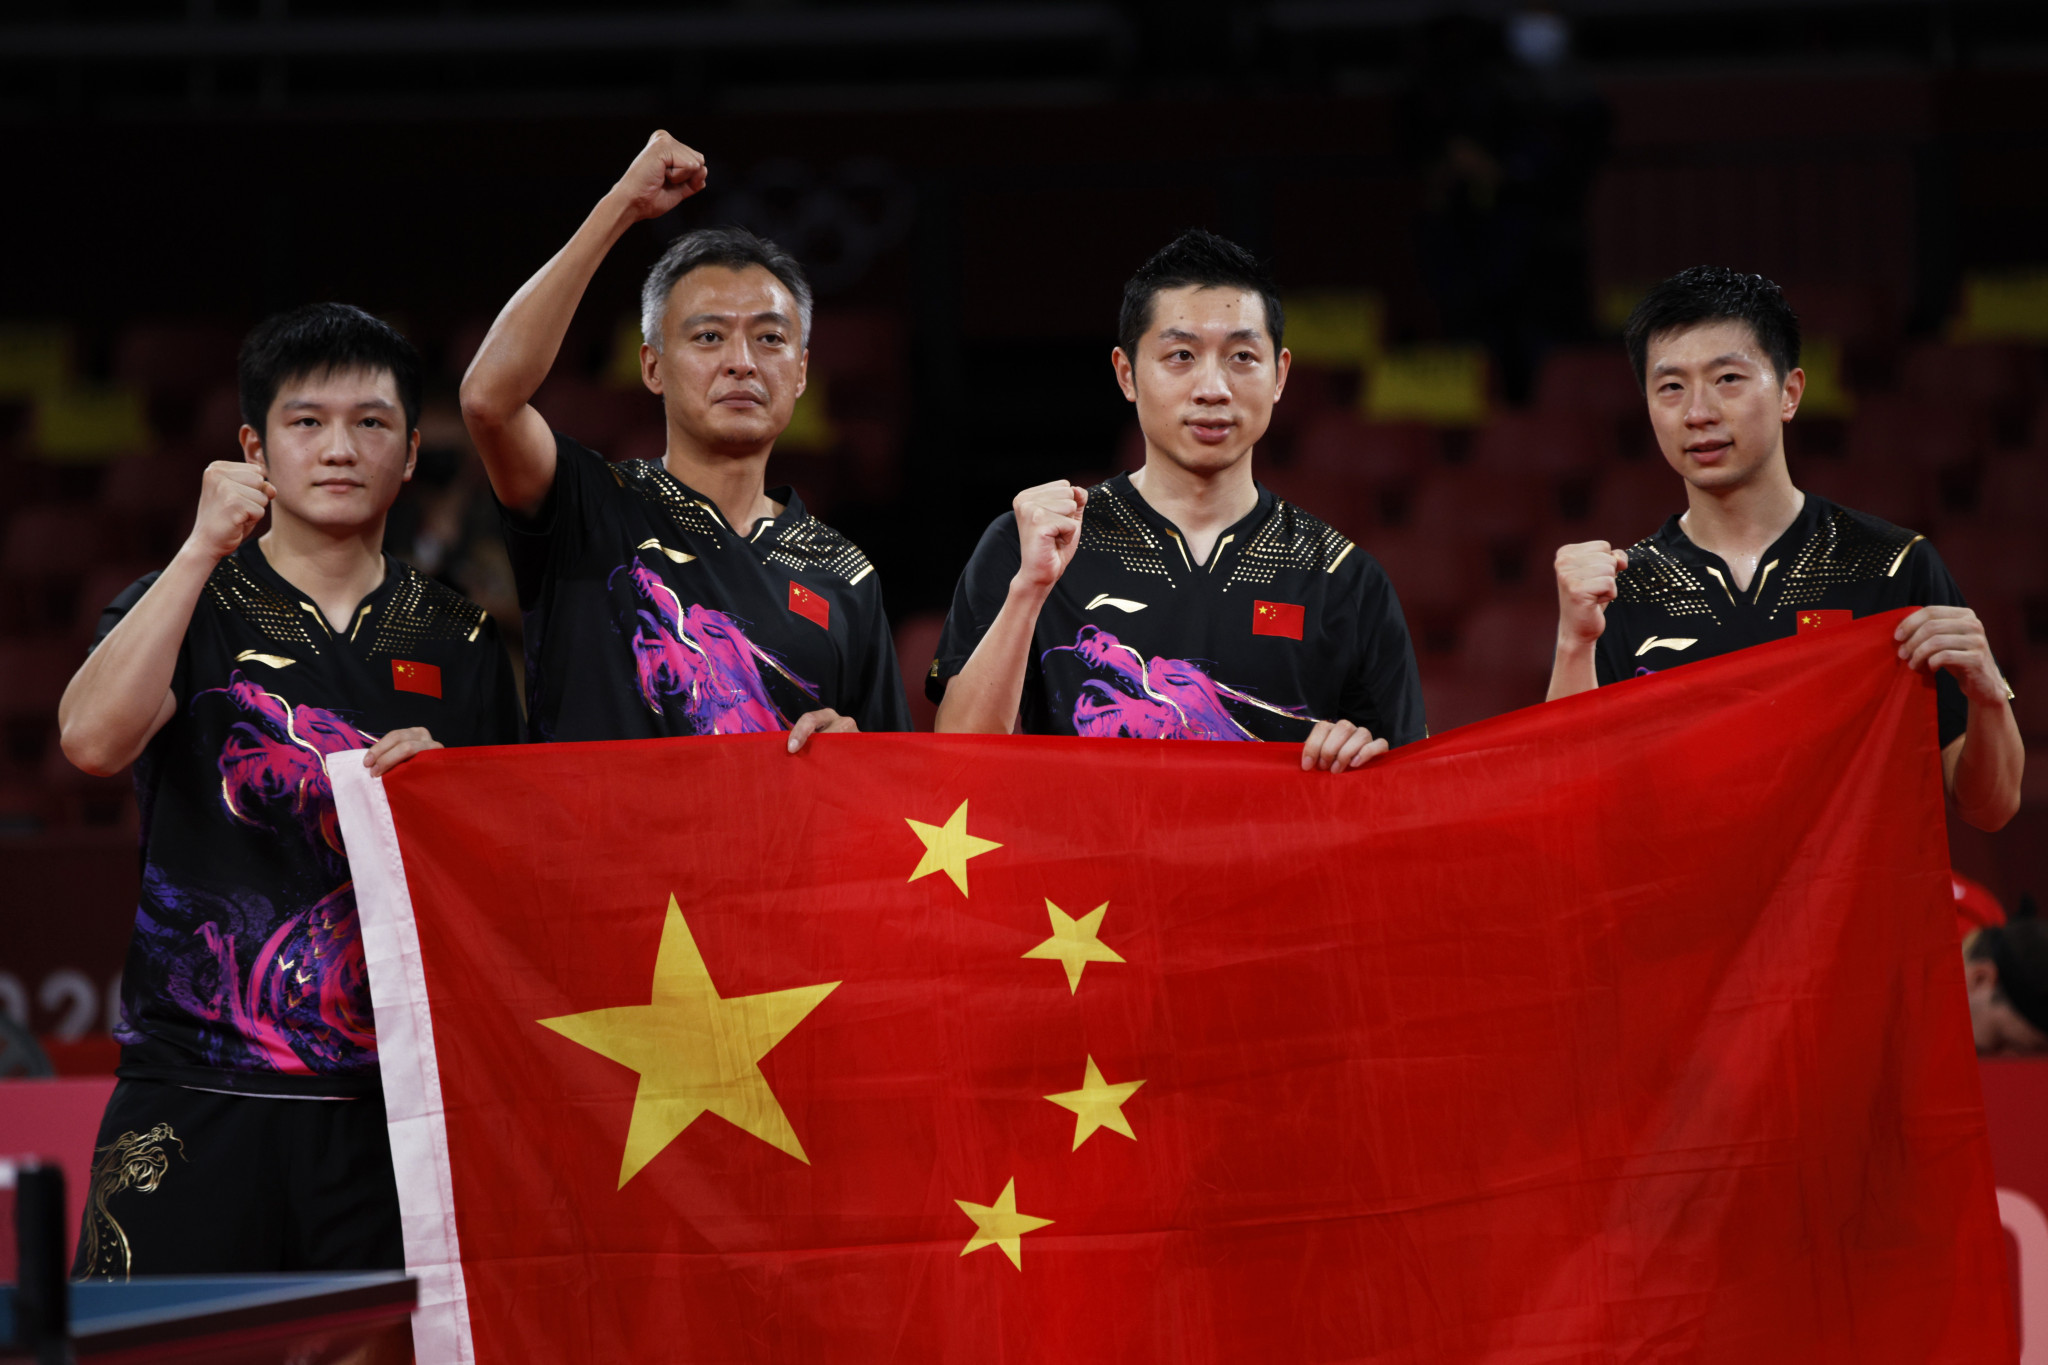 China cruise to predictable Olympic gold in men's team table tennis event